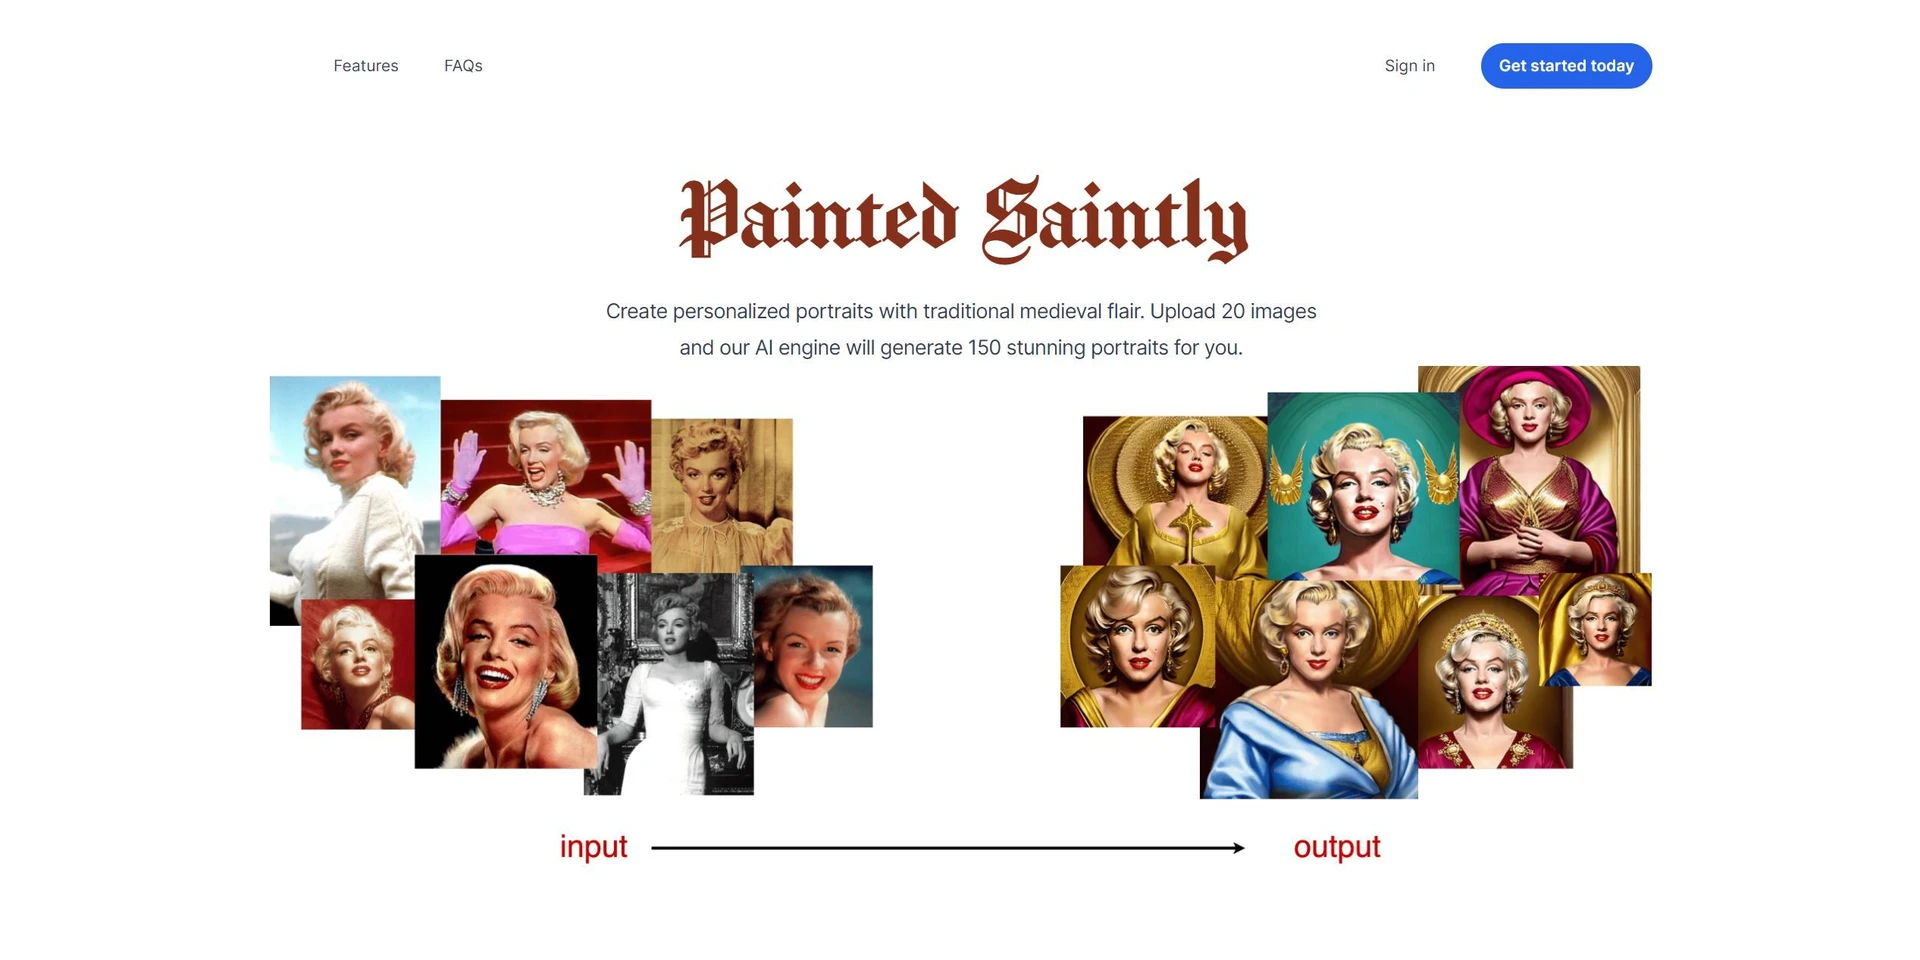 Painted Saintlywebsite picture